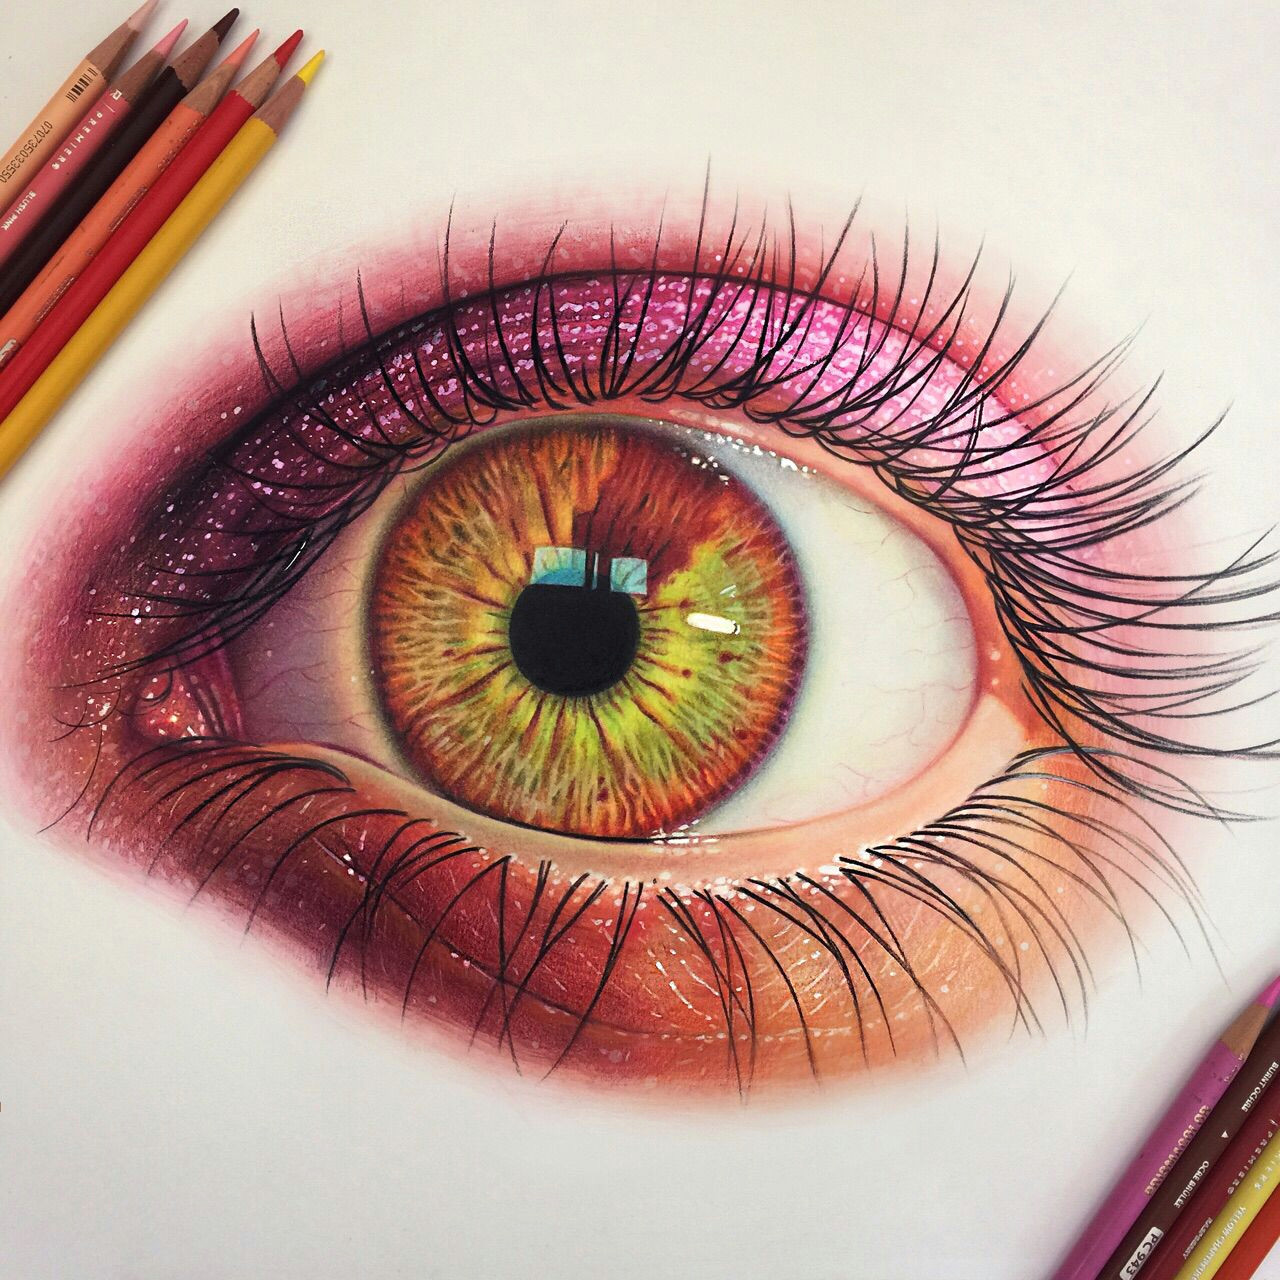 Drawing Eyes with Colored Pencils 25 Stunning and Realistic Color Pencil Drawings by Morgan Davidson